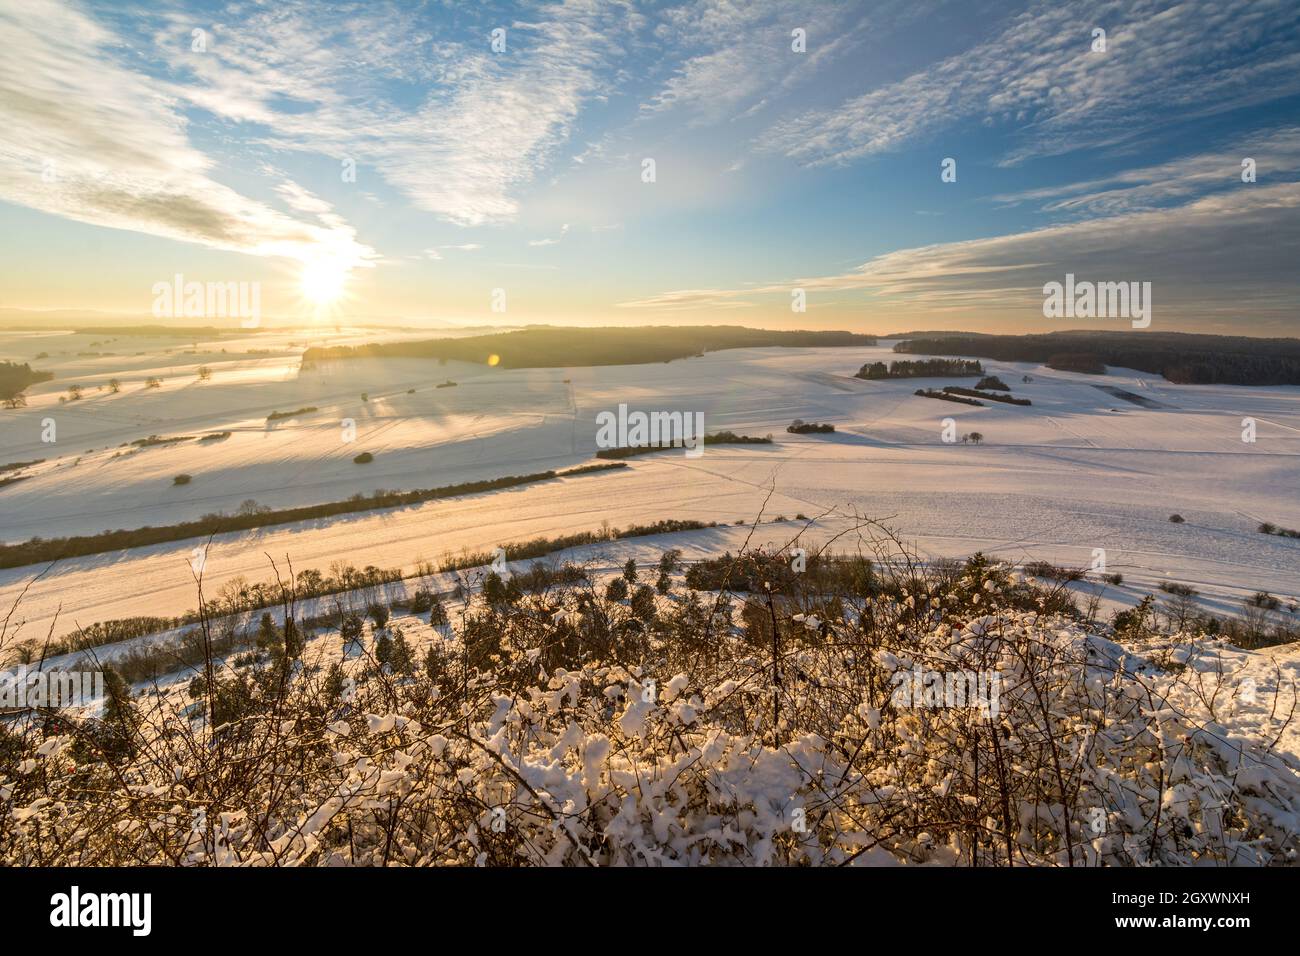 Panorama view of beautiful snowy winter landscape in the Swabian Alps at sunset Stock Photo